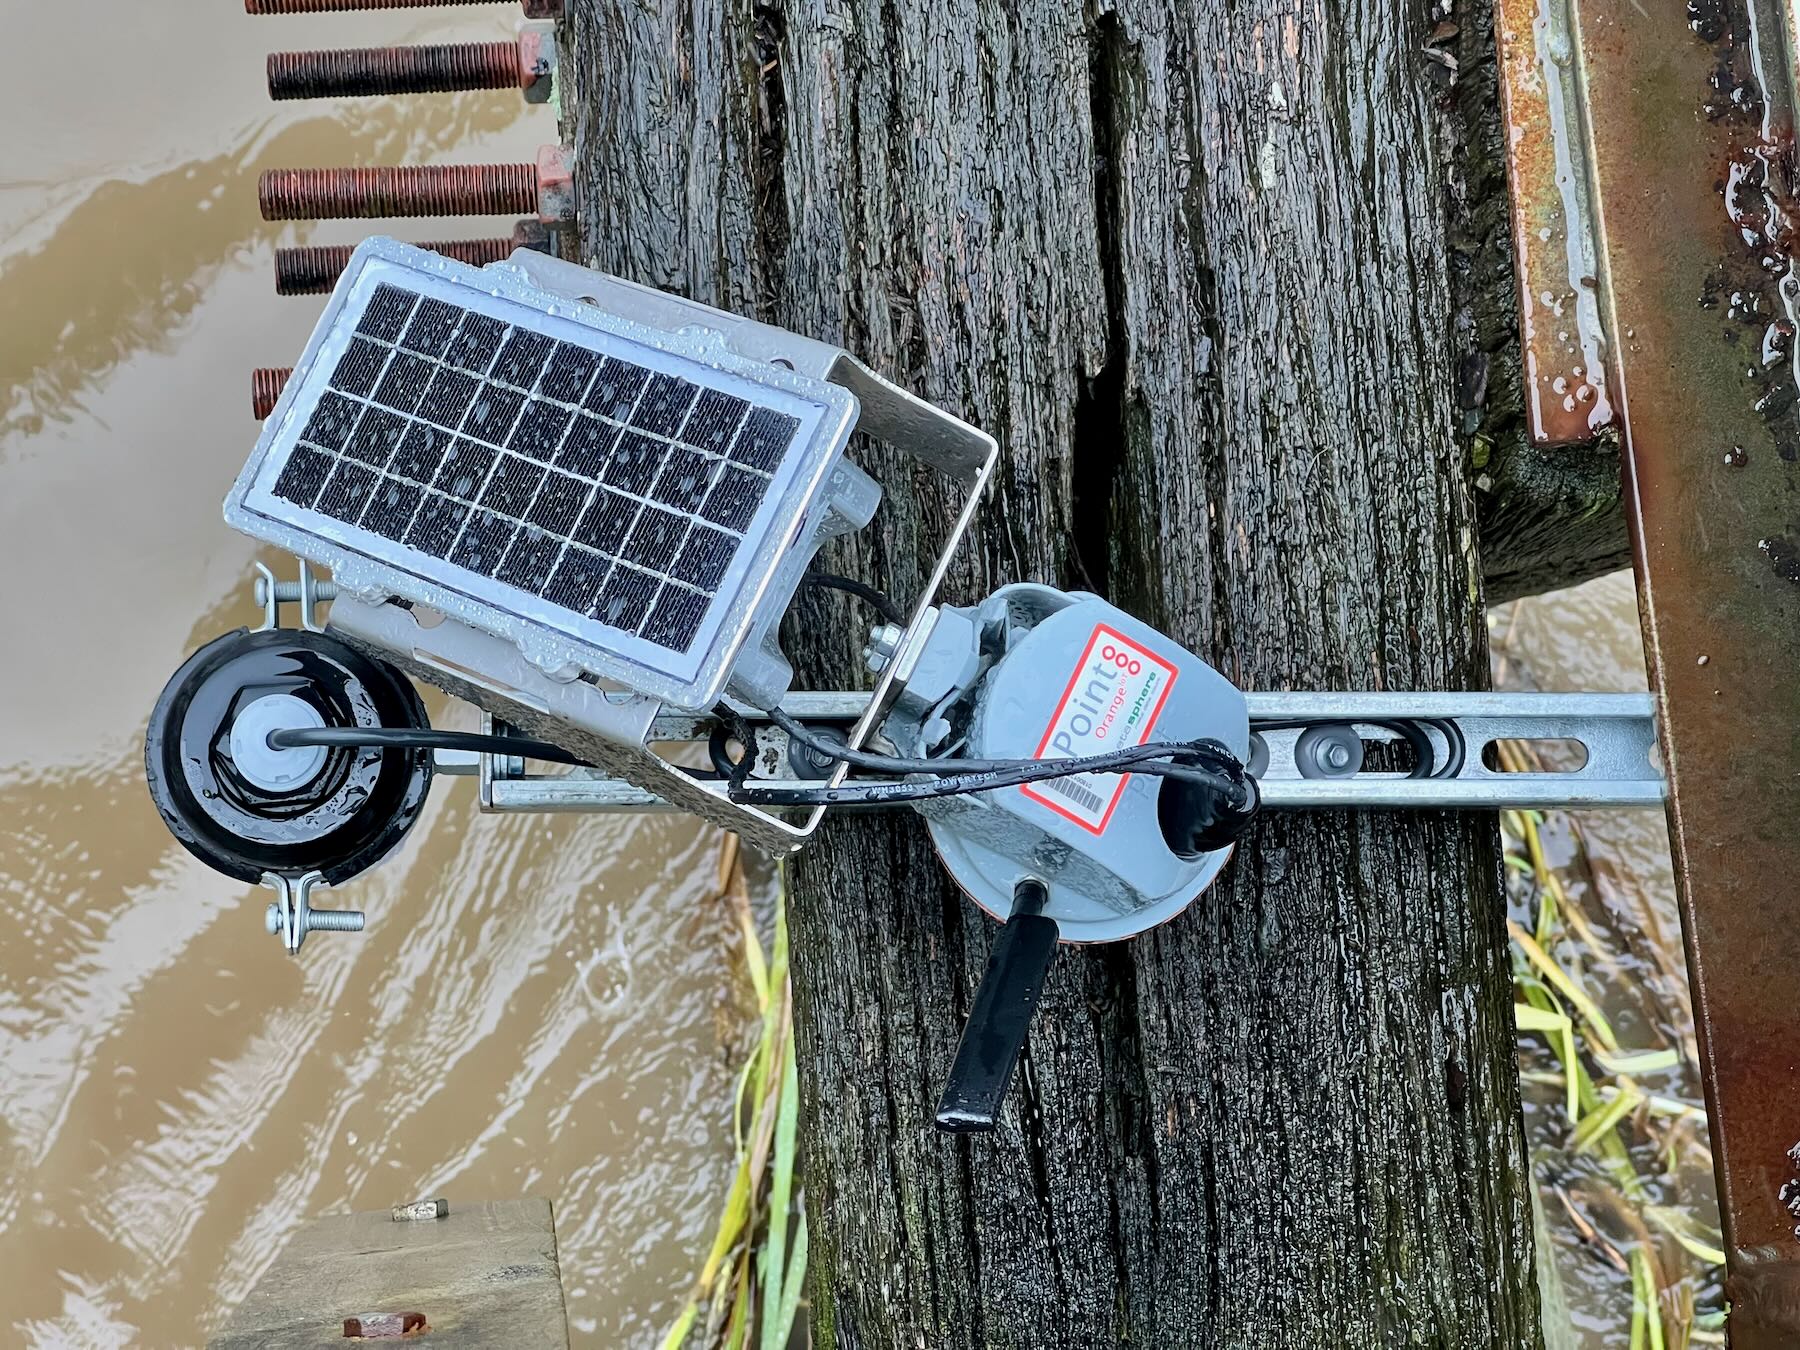 Device with small solar panel attached to the footbridge. 